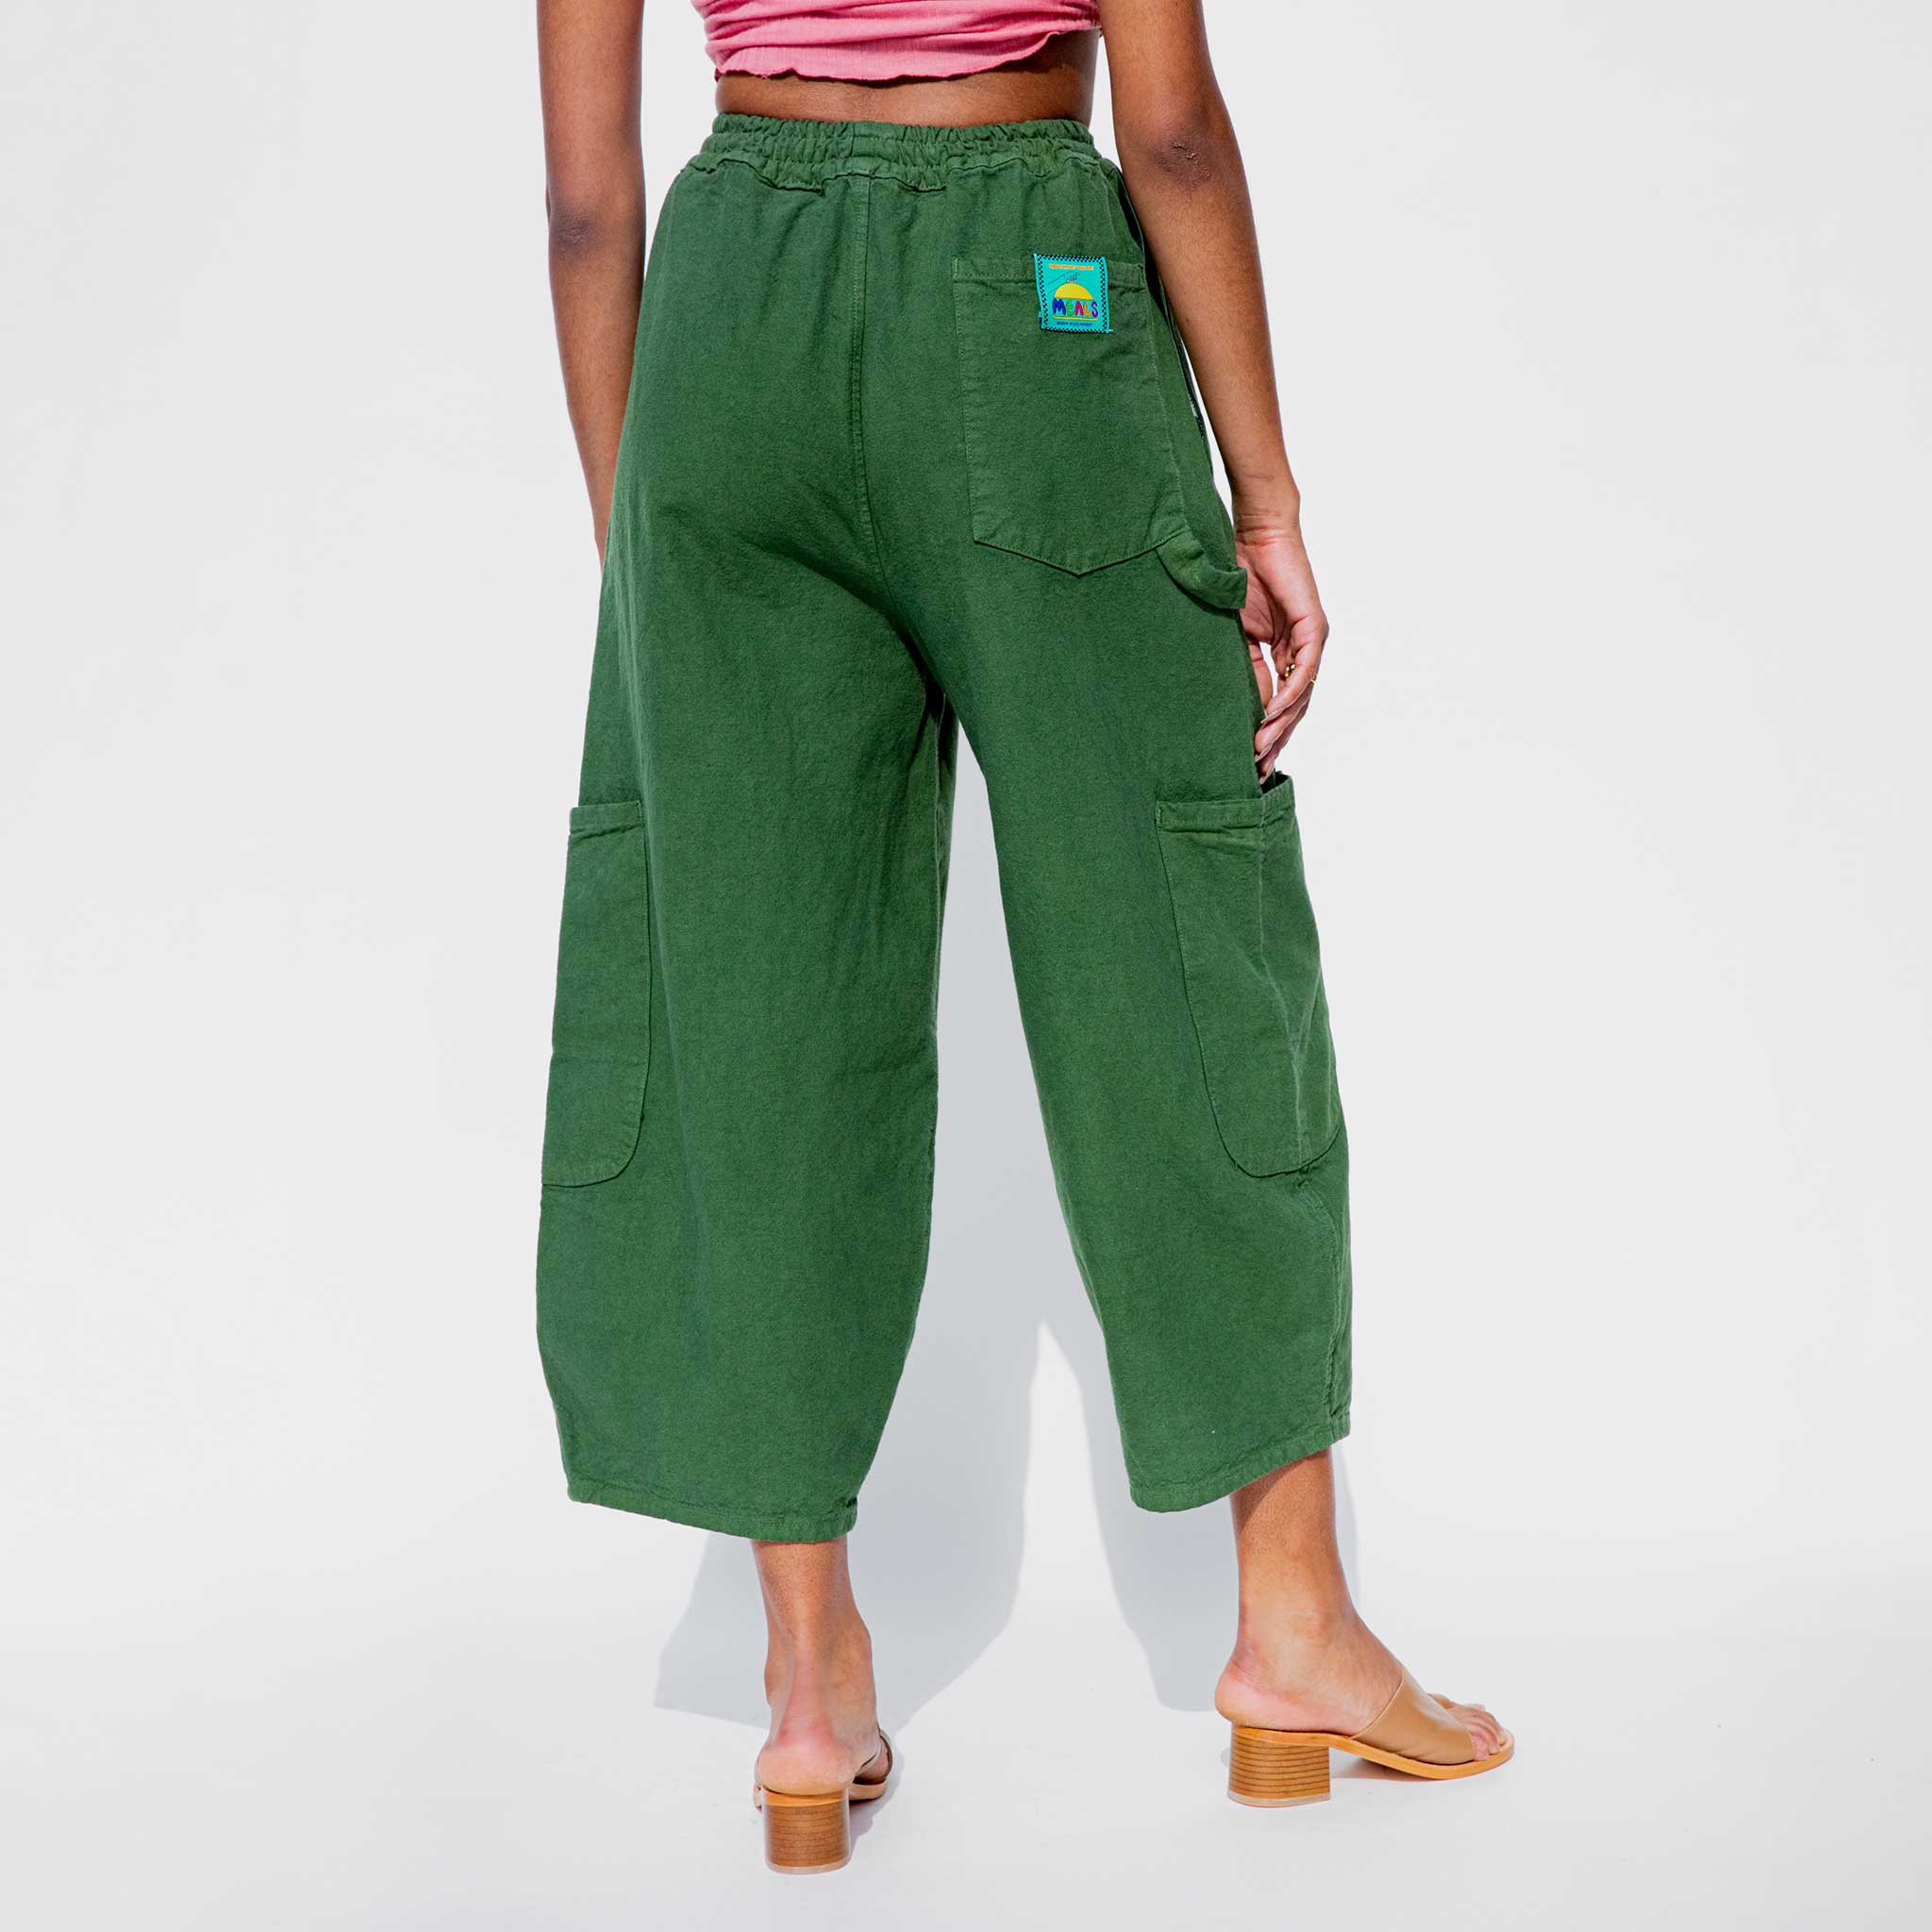 Back photo of Meals Chef pant in Kale green.